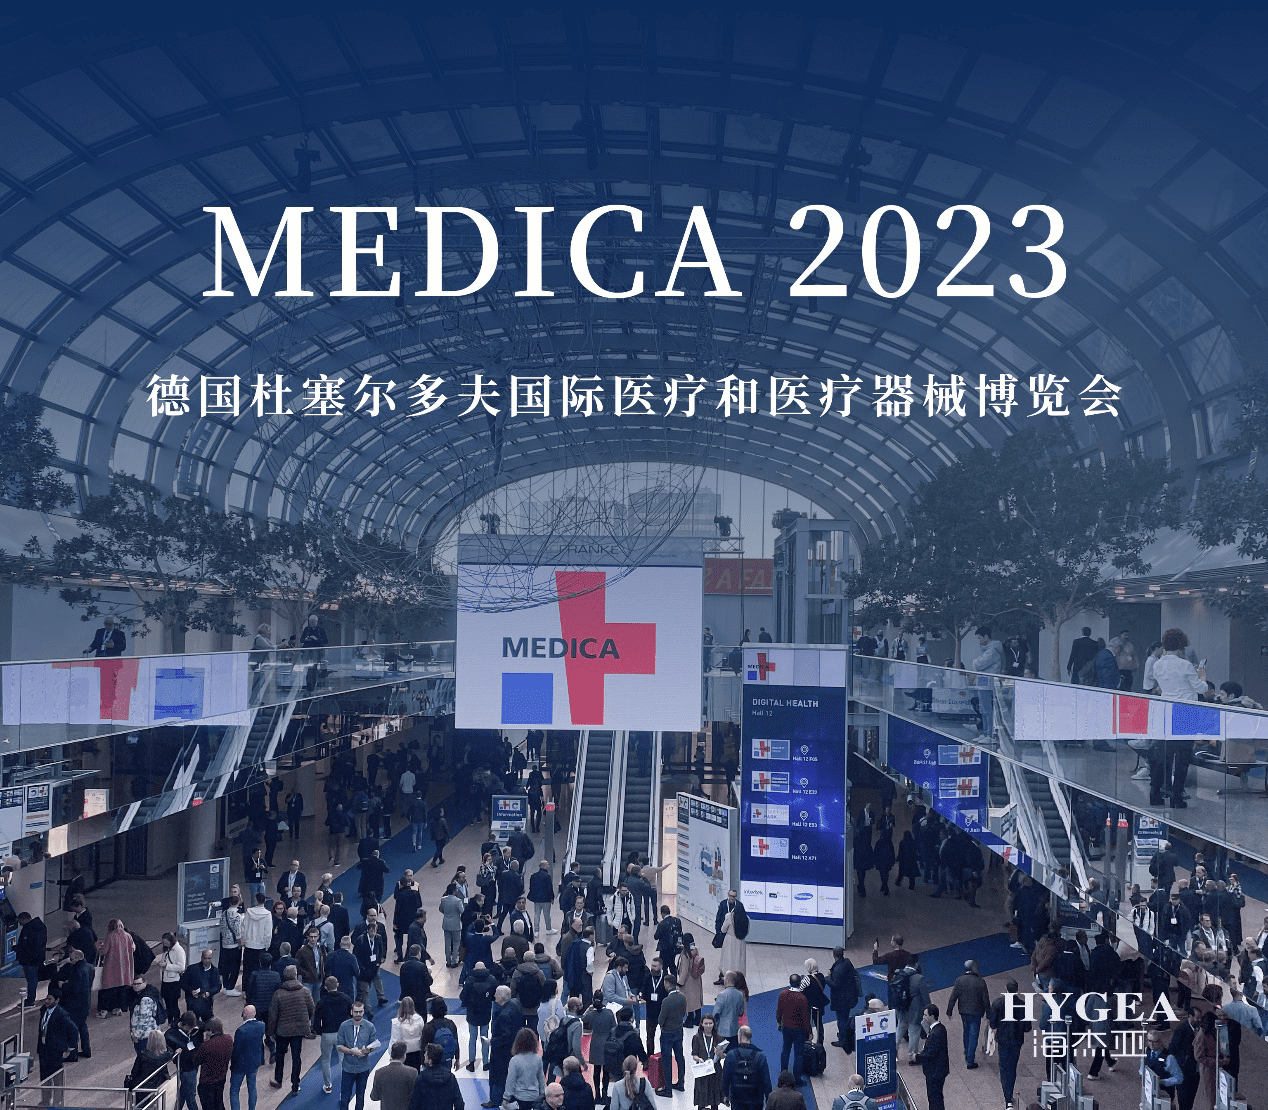 The remarkable presence of Hygea at MEDICA